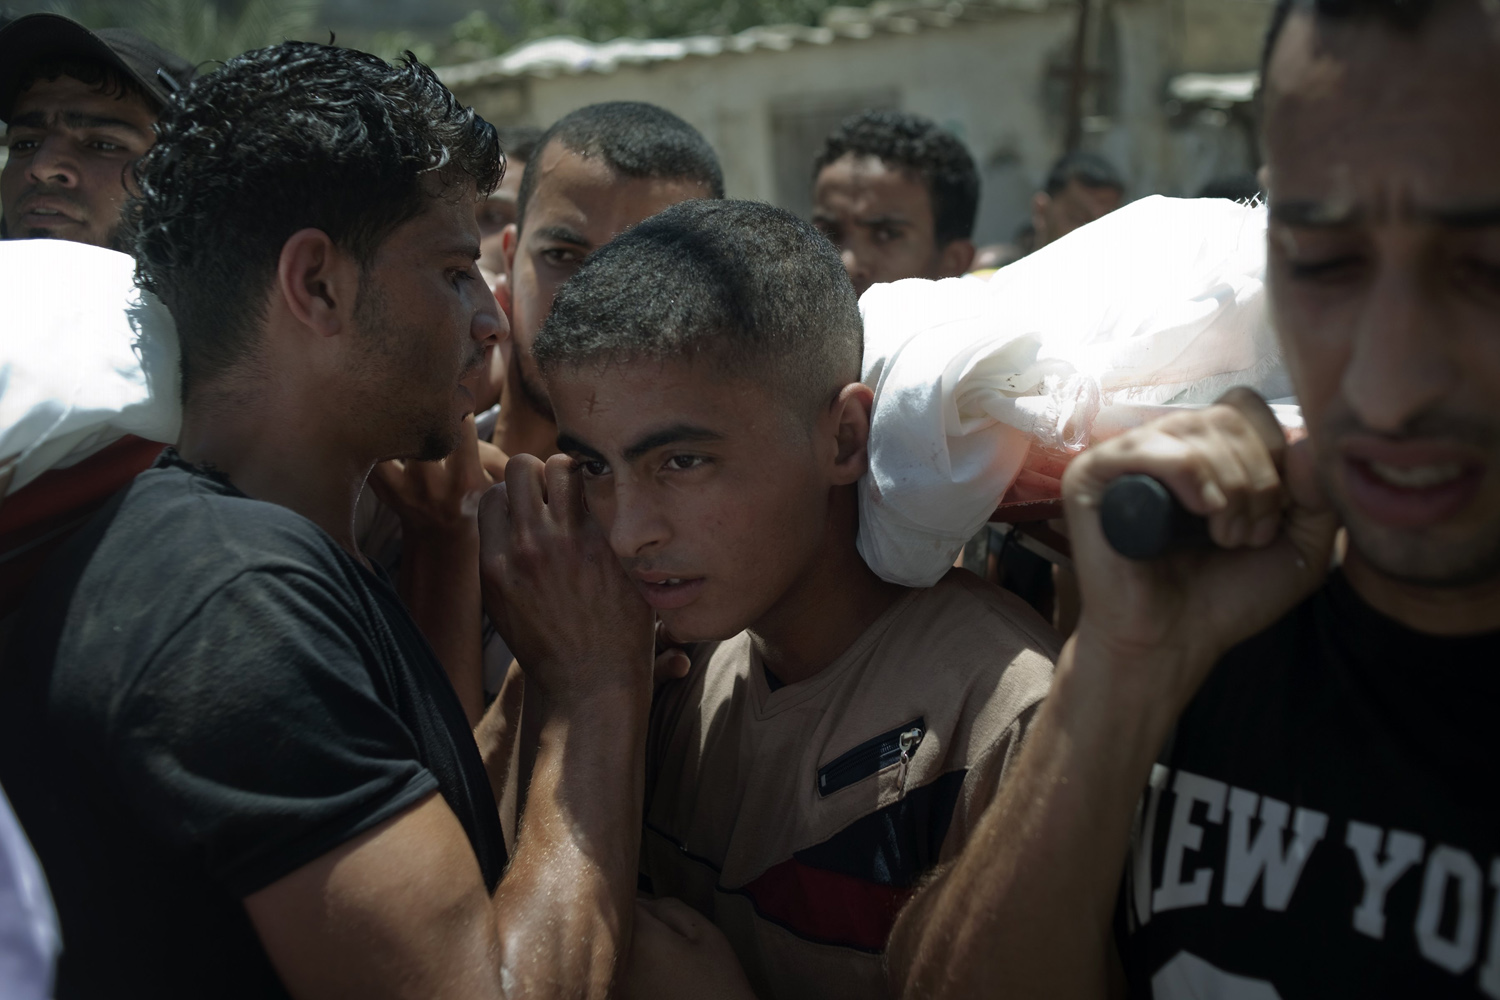 PALESTINIANS MOURN THE DEMISE OF AL-HAJ FAMILY MEMBERS FROM ISRAELI AIRSTRIKES